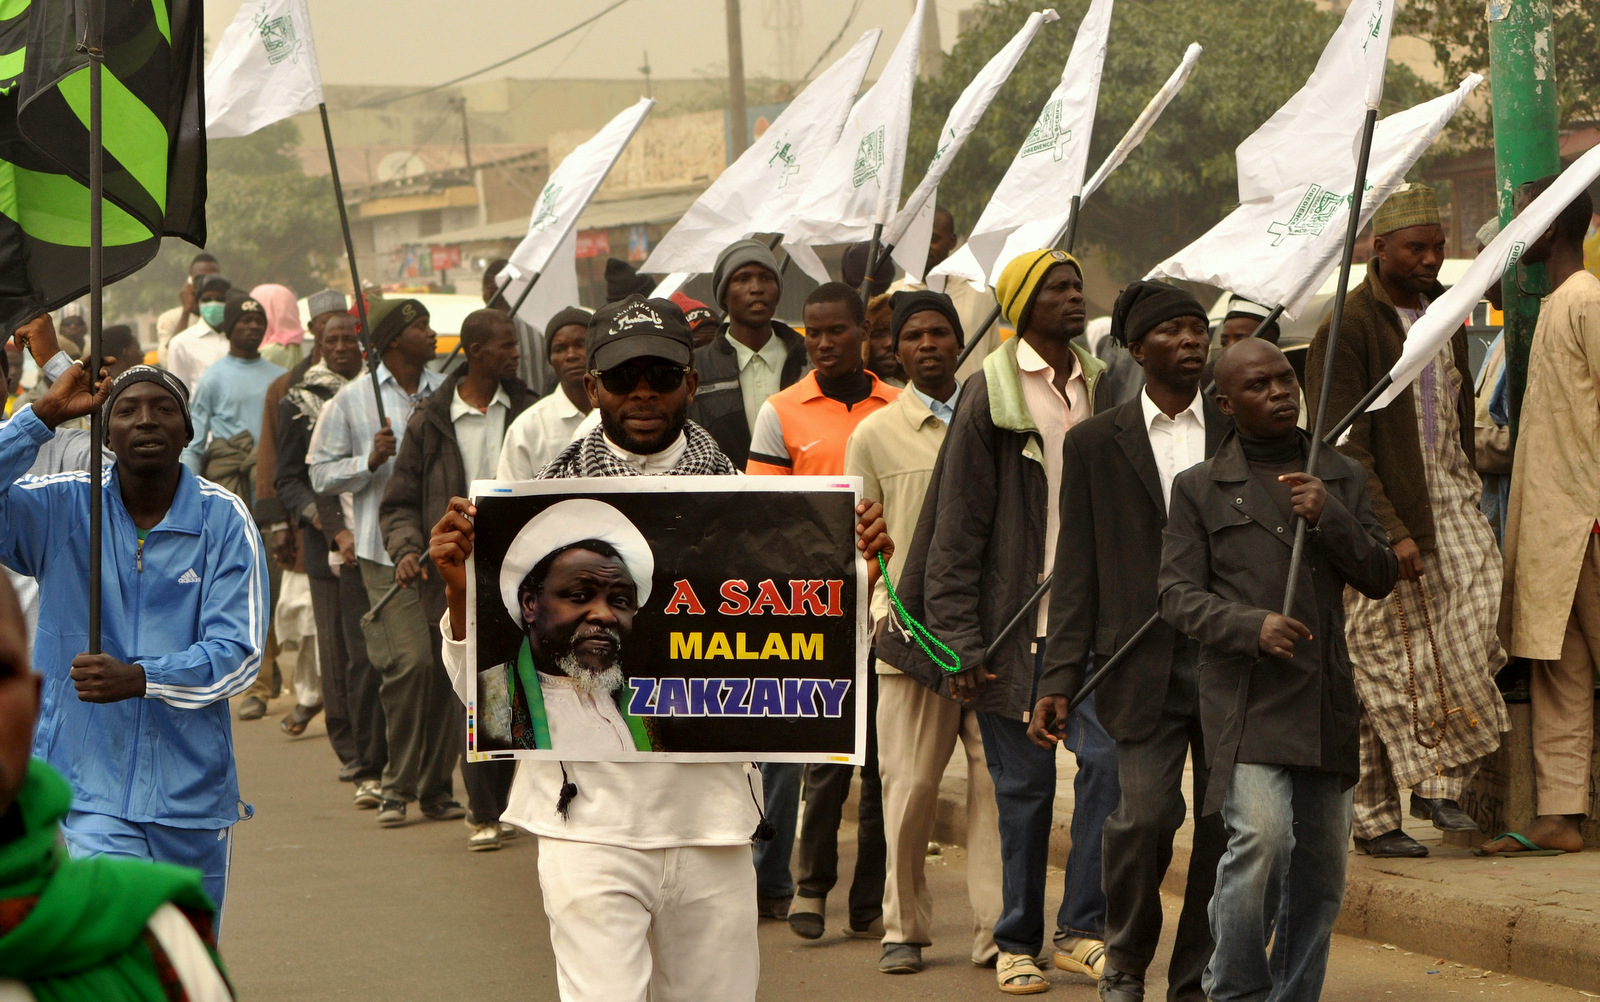 Police prevent Shi’ites from holding protest in Abuja